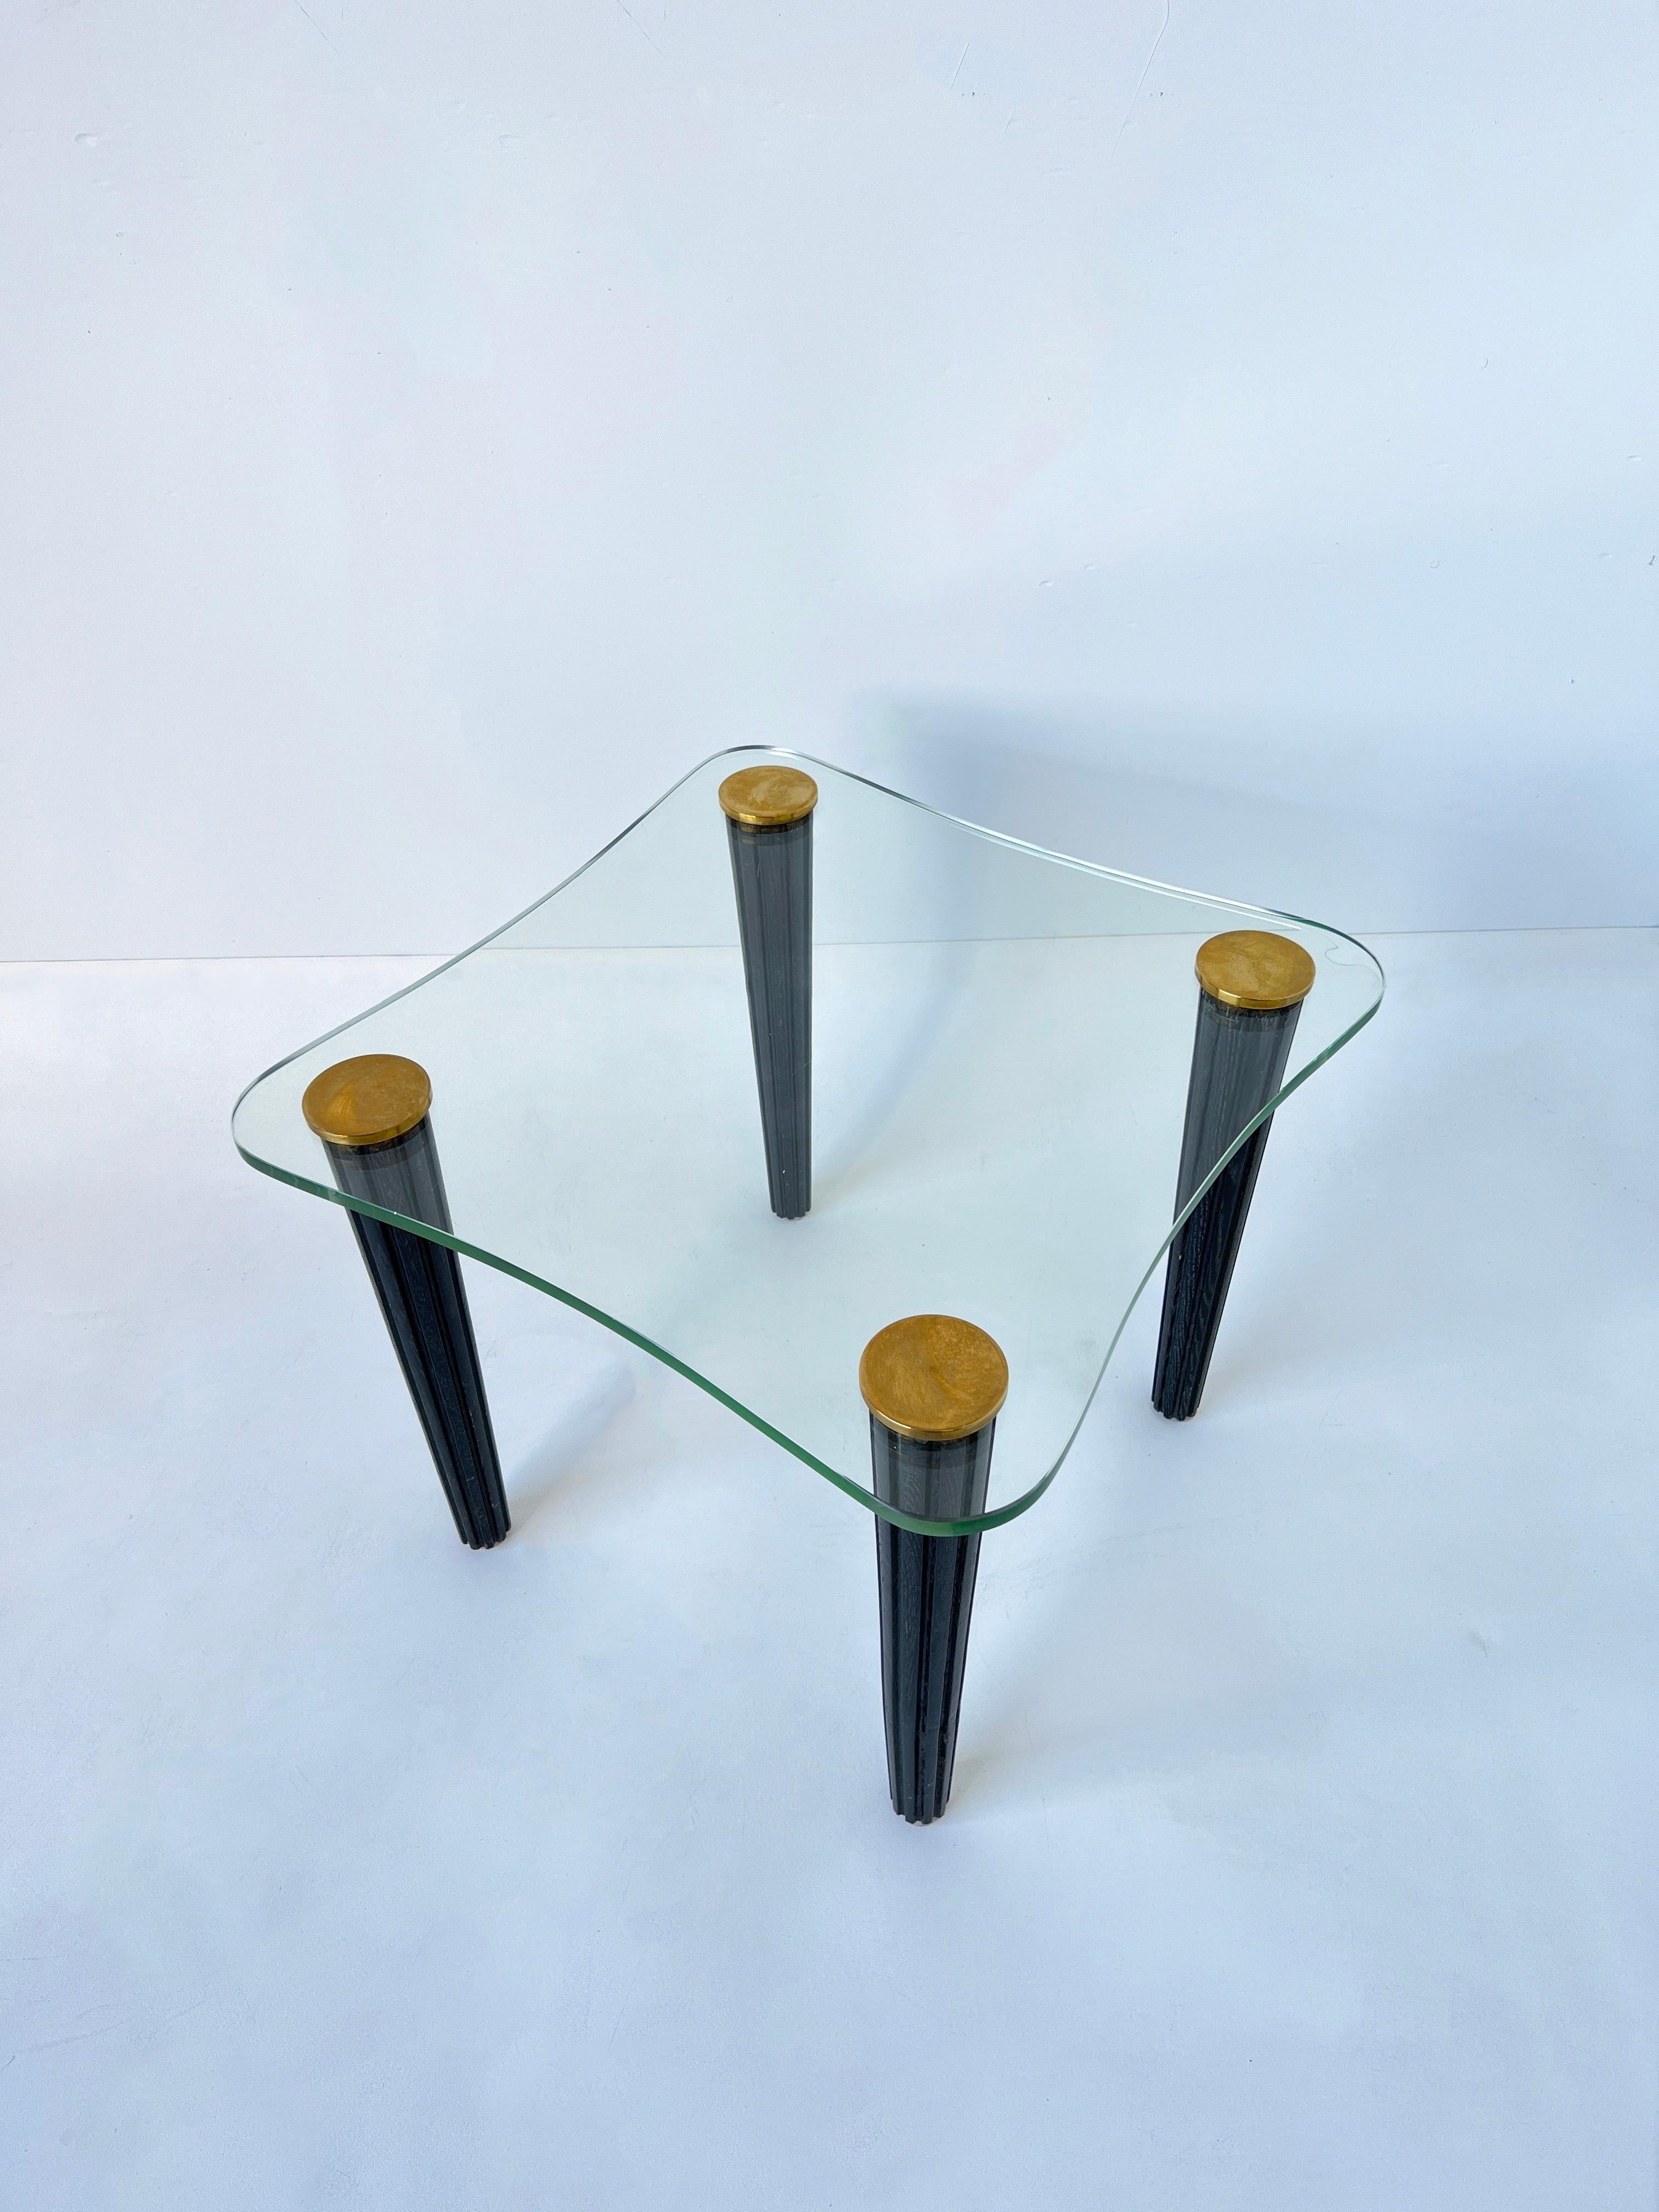 Beautiful 1940s freeform side table by Gilbert Rohde. 
The legs are black Cerused oak and unfinished brass caps hold the original green lead freeform glass top. 
In beautiful original condition, shows minor wear consistent with age.